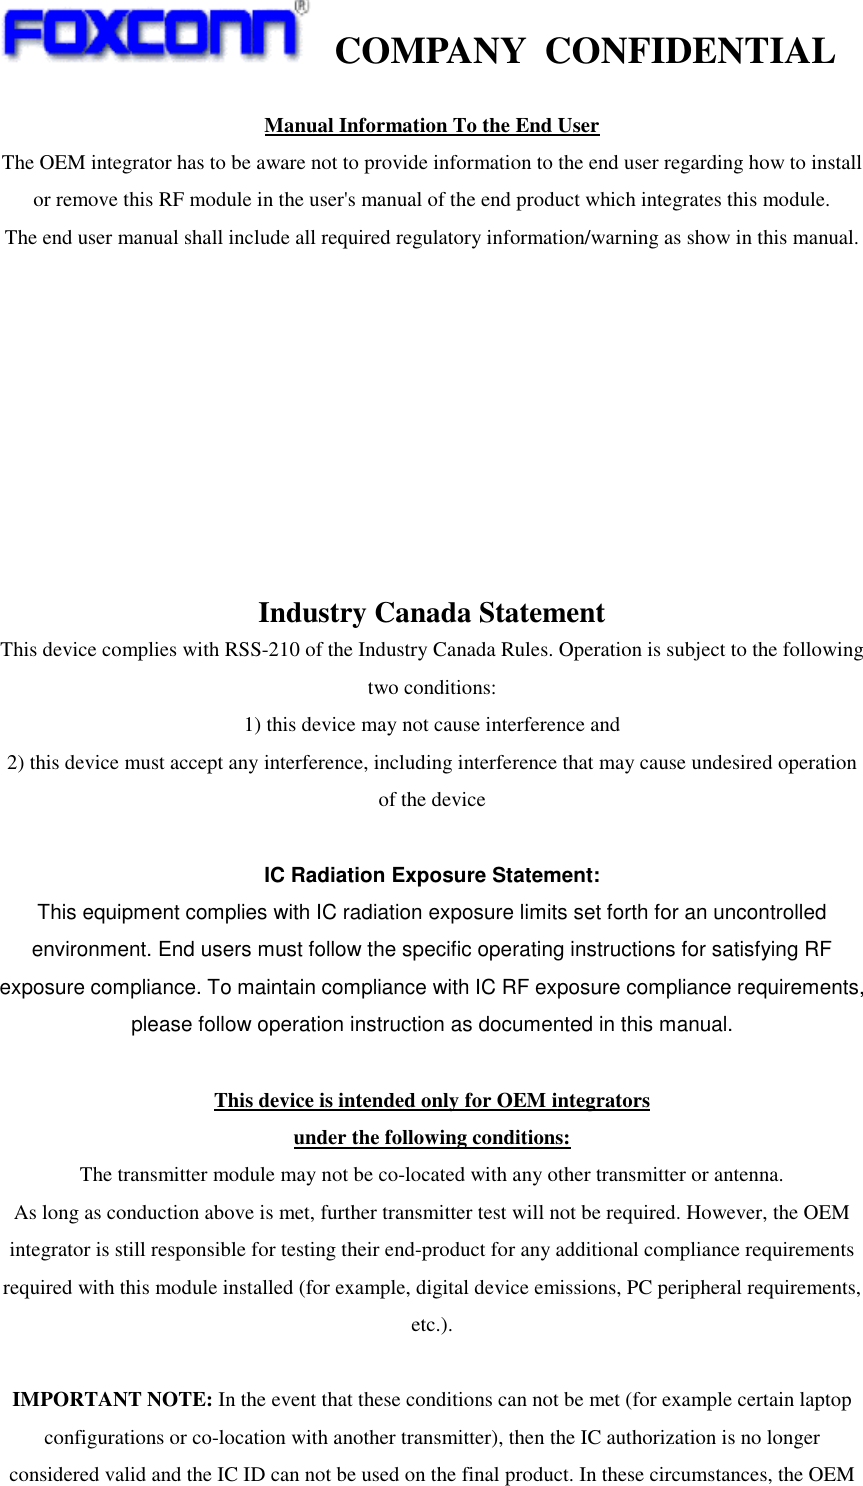    COMPANY  CONFIDENTIAL             Manual Information To the End User The OEM integrator has to be aware not to provide information to the end user regarding how to install or remove this RF module in the user&apos;s manual of the end product which integrates this module. The end user manual shall include all required regulatory information/warning as show in this manual.          Industry Canada Statement This device complies with RSS-210 of the Industry Canada Rules. Operation is subject to the following two conditions: 1) this device may not cause interference and 2) this device must accept any interference, including interference that may cause undesired operation of the device  IC Radiation Exposure Statement: This equipment complies with IC radiation exposure limits set forth for an uncontrolled environment. End users must follow the specific operating instructions for satisfying RF exposure compliance. To maintain compliance with IC RF exposure compliance requirements, please follow operation instruction as documented in this manual.  This device is intended only for OEM integrators under the following conditions: The transmitter module may not be co-located with any other transmitter or antenna. As long as conduction above is met, further transmitter test will not be required. However, the OEM integrator is still responsible for testing their end-product for any additional compliance requirements required with this module installed (for example, digital device emissions, PC peripheral requirements, etc.).  IMPORTANT NOTE: In the event that these conditions can not be met (for example certain laptop configurations or co-location with another transmitter), then the IC authorization is no longer considered valid and the IC ID can not be used on the final product. In these circumstances, the OEM 